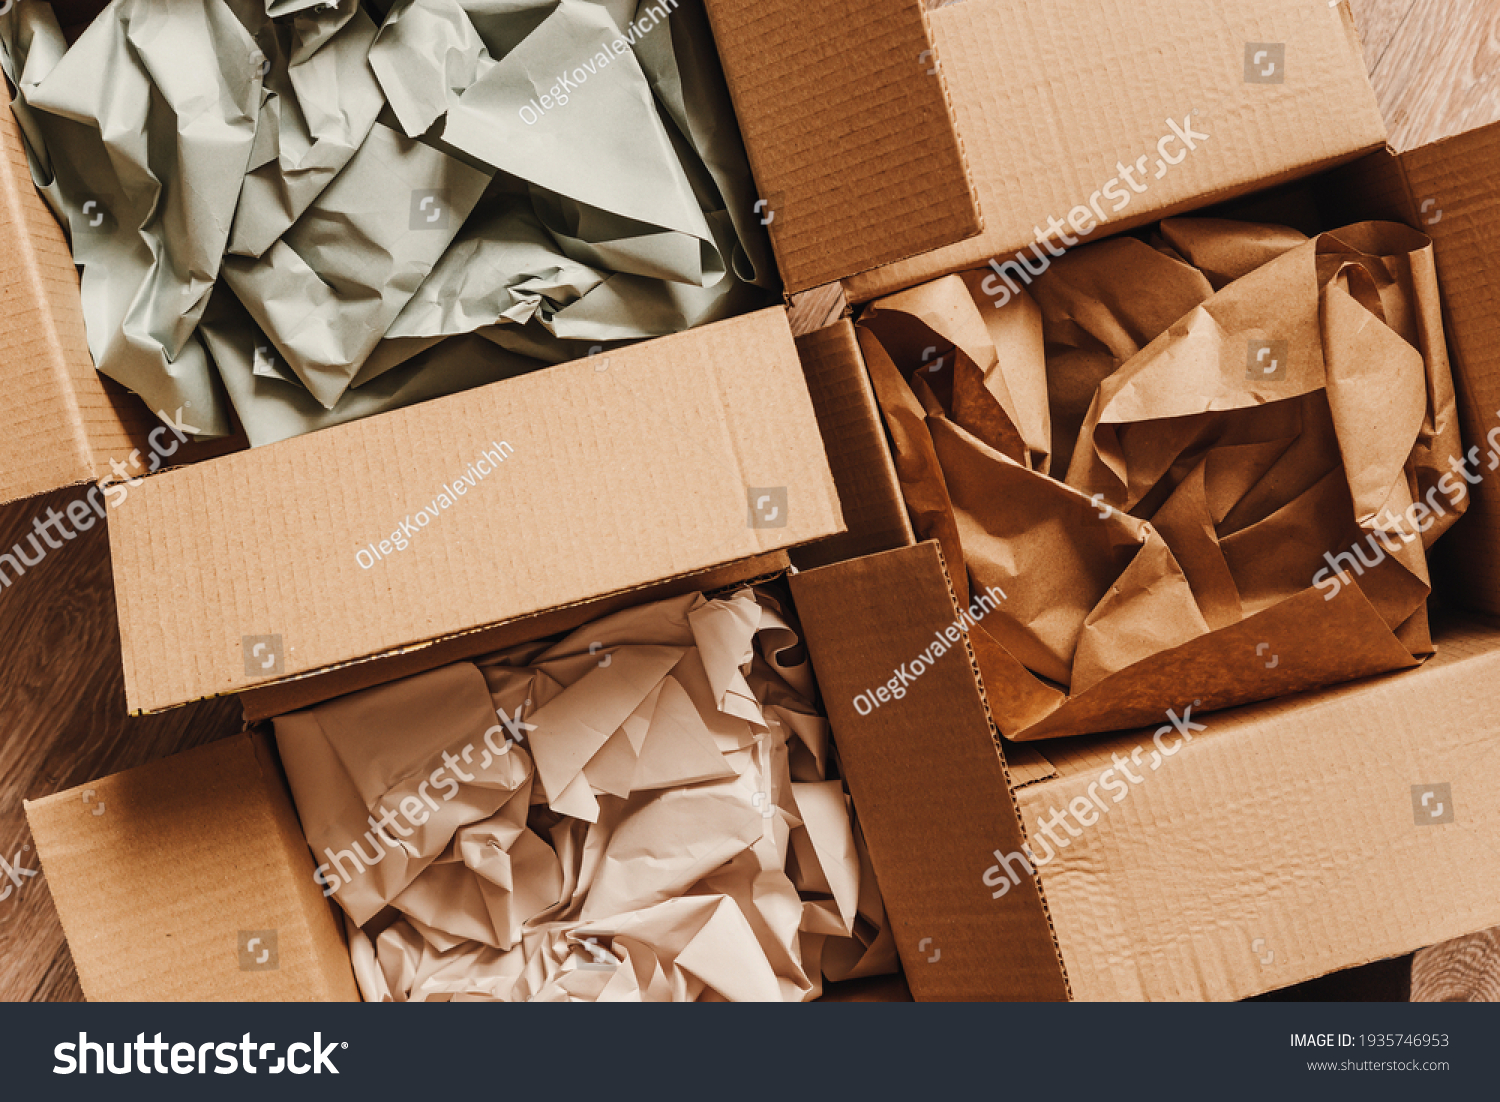 Cardboard boxes with crumpled paper inside for packaging goods from online stores, eco friendly packaging made of recyclable raw materials #1935746953